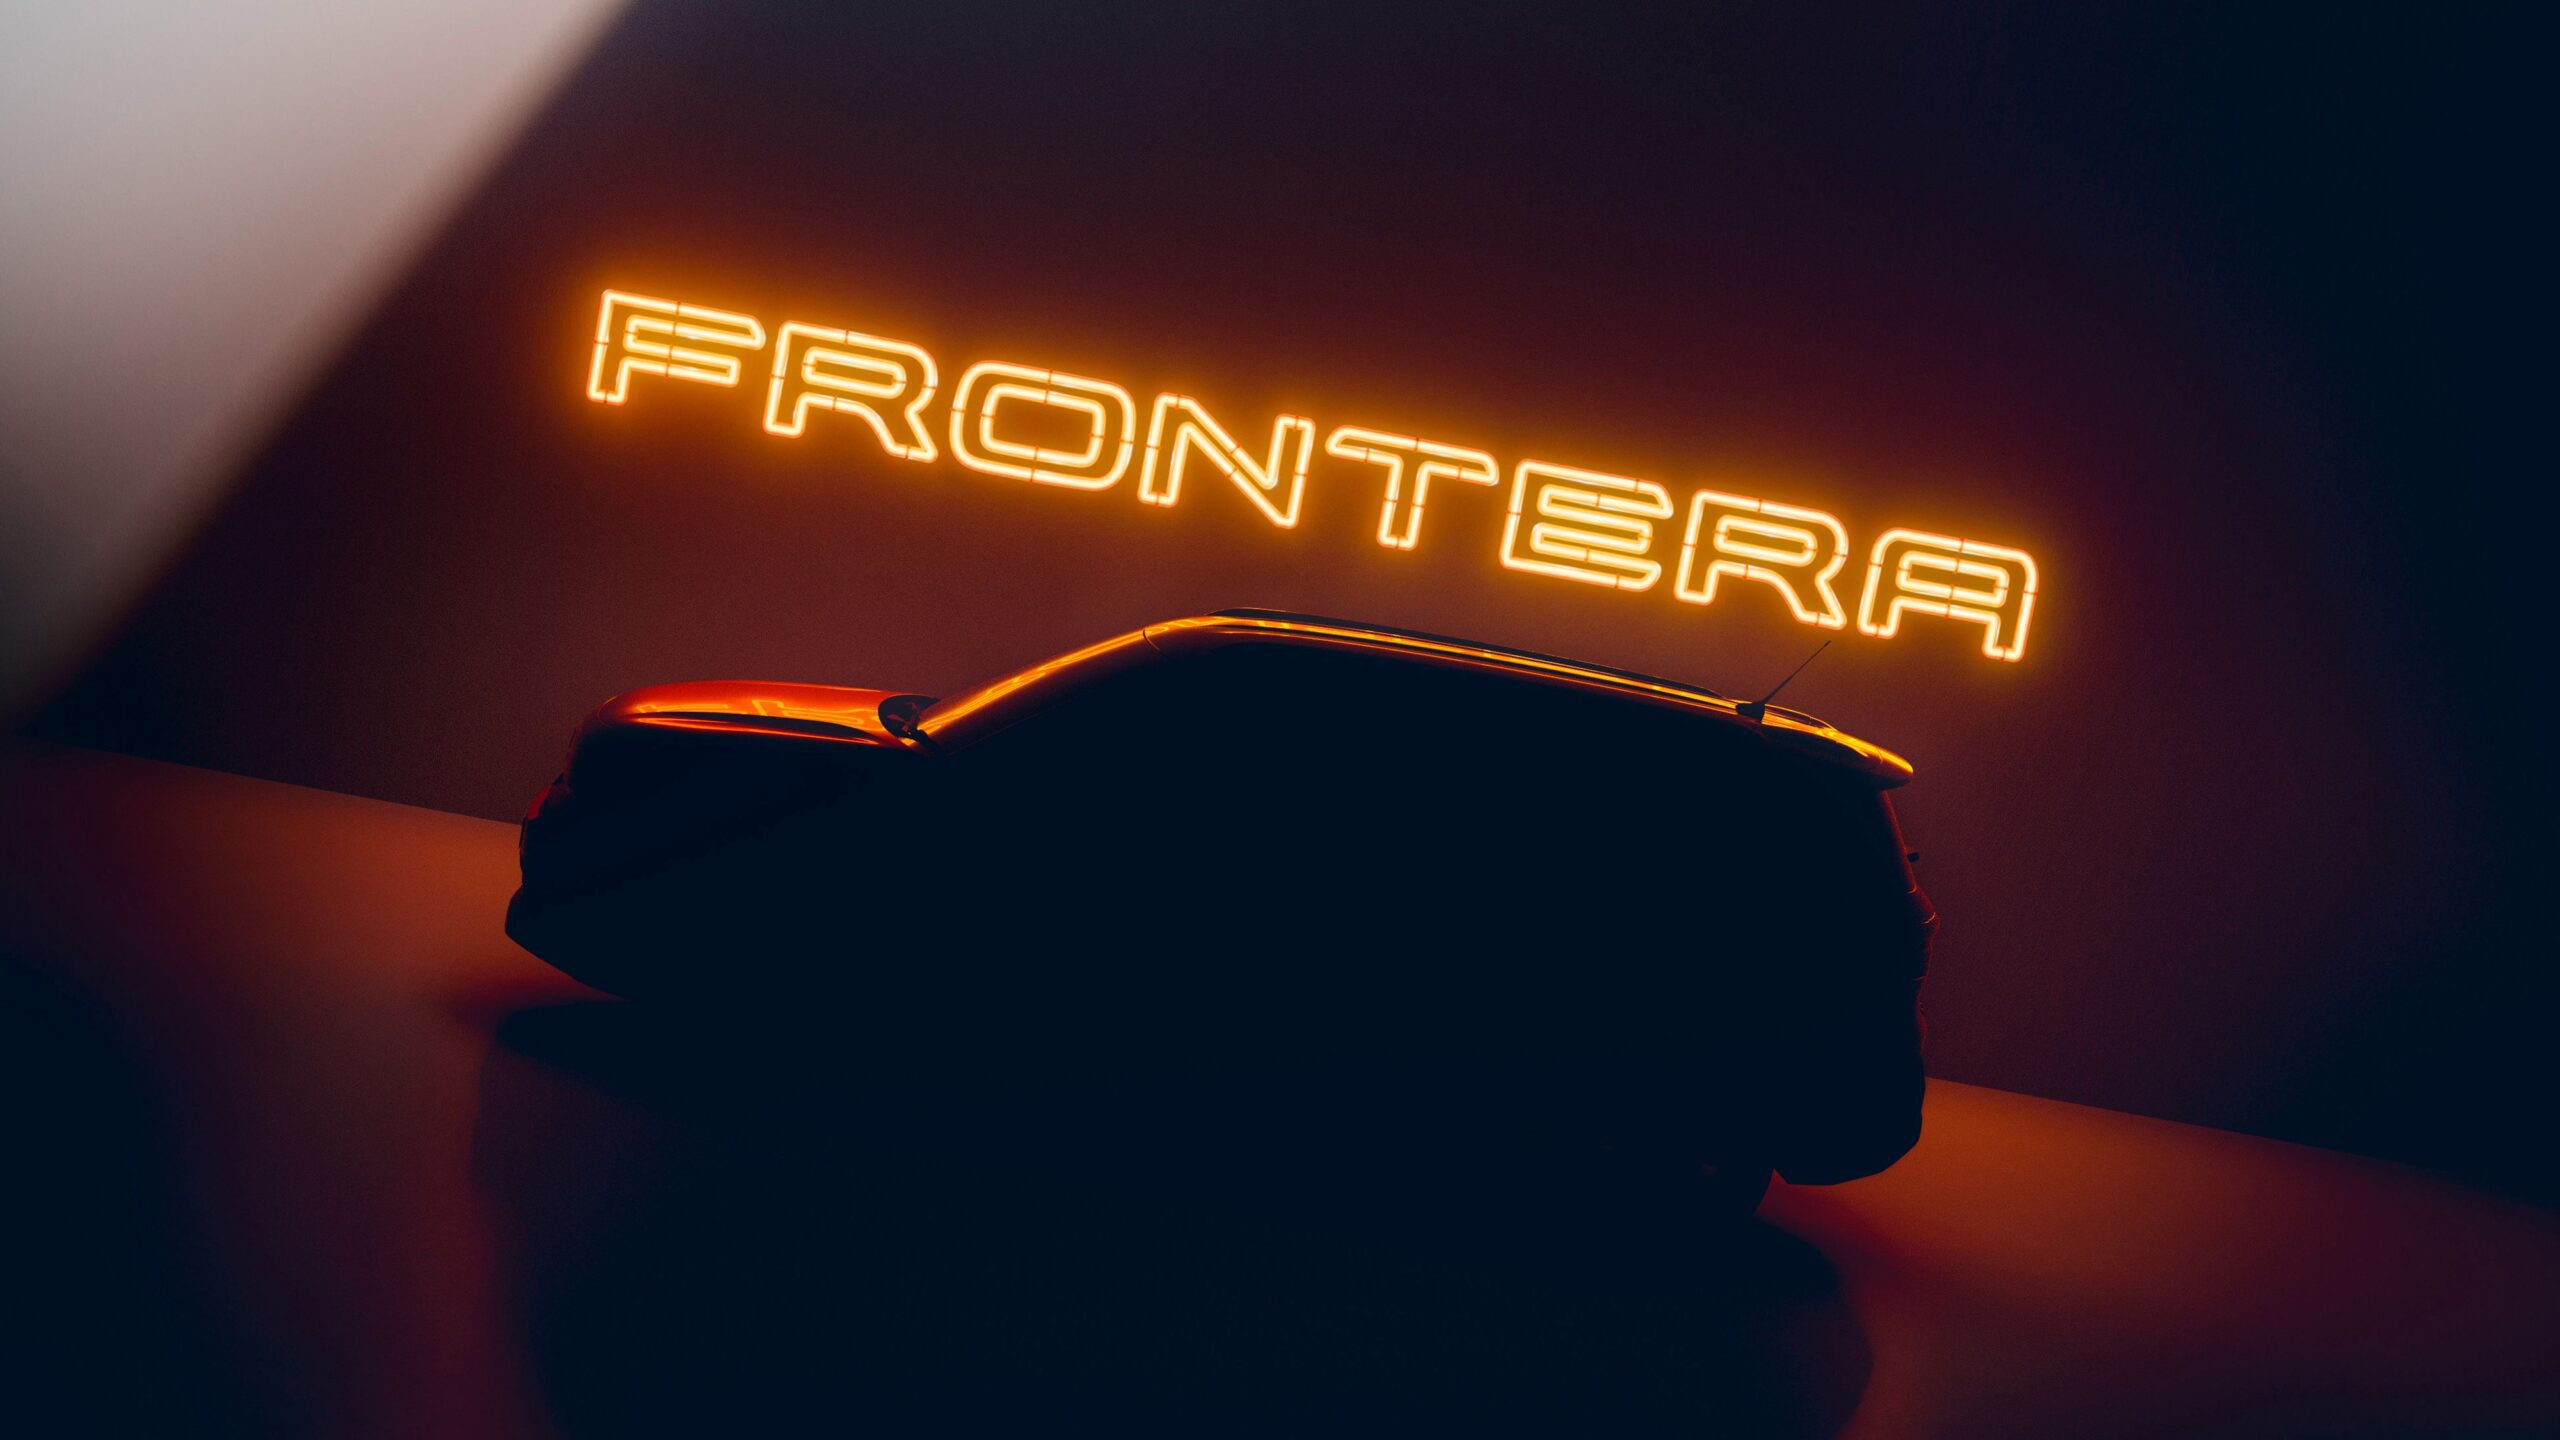 Teaser image of the new Opel Frontera SUV